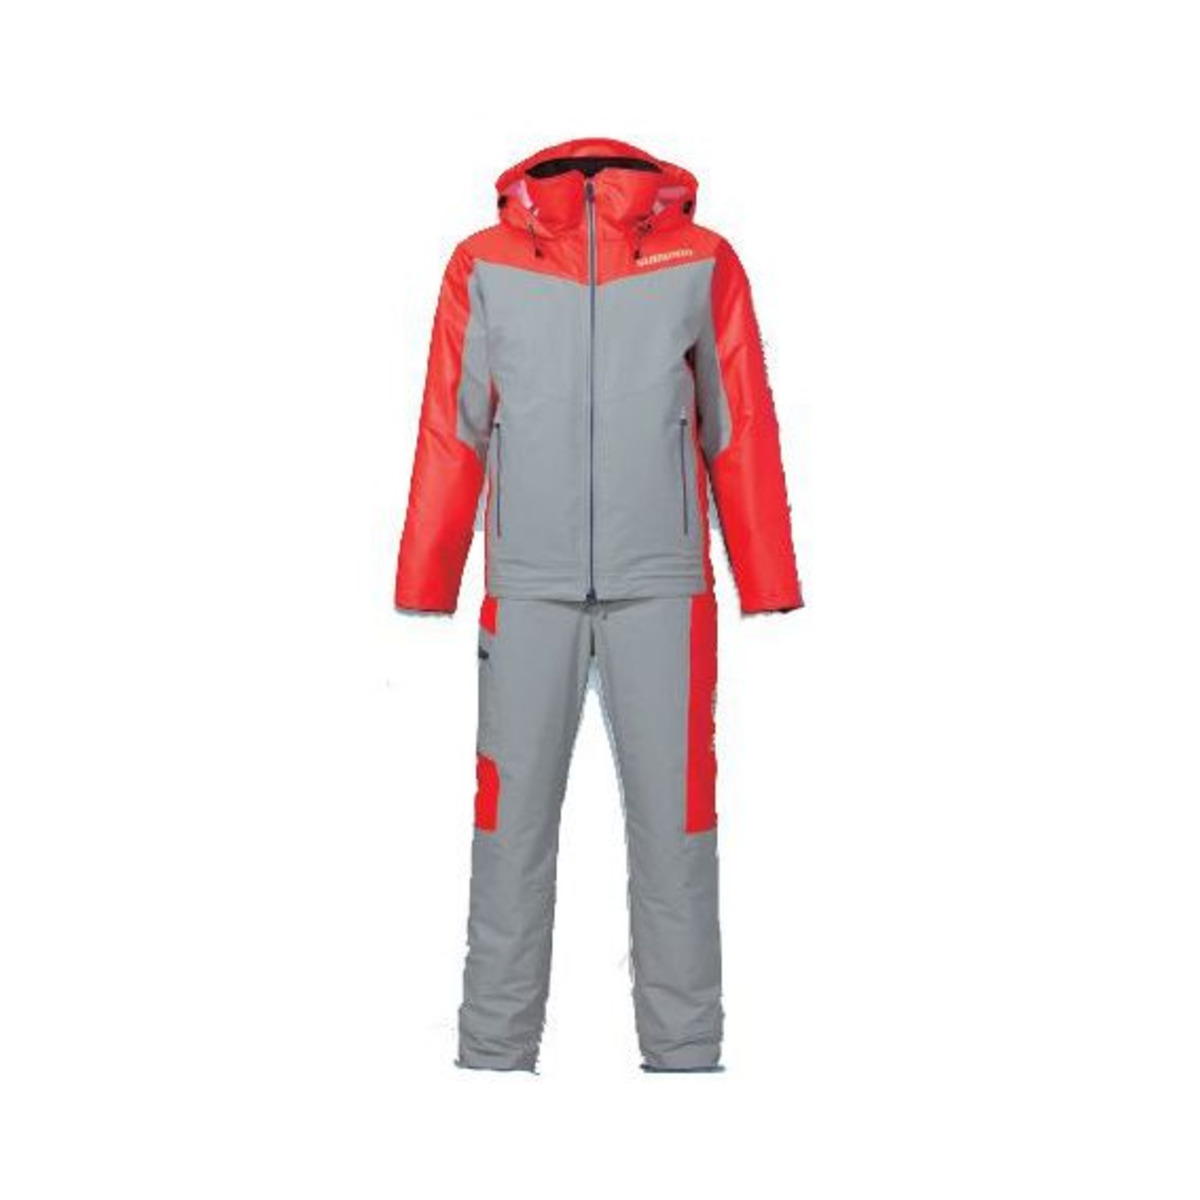 Shimano Thermal Suit - XL - Red-Grey